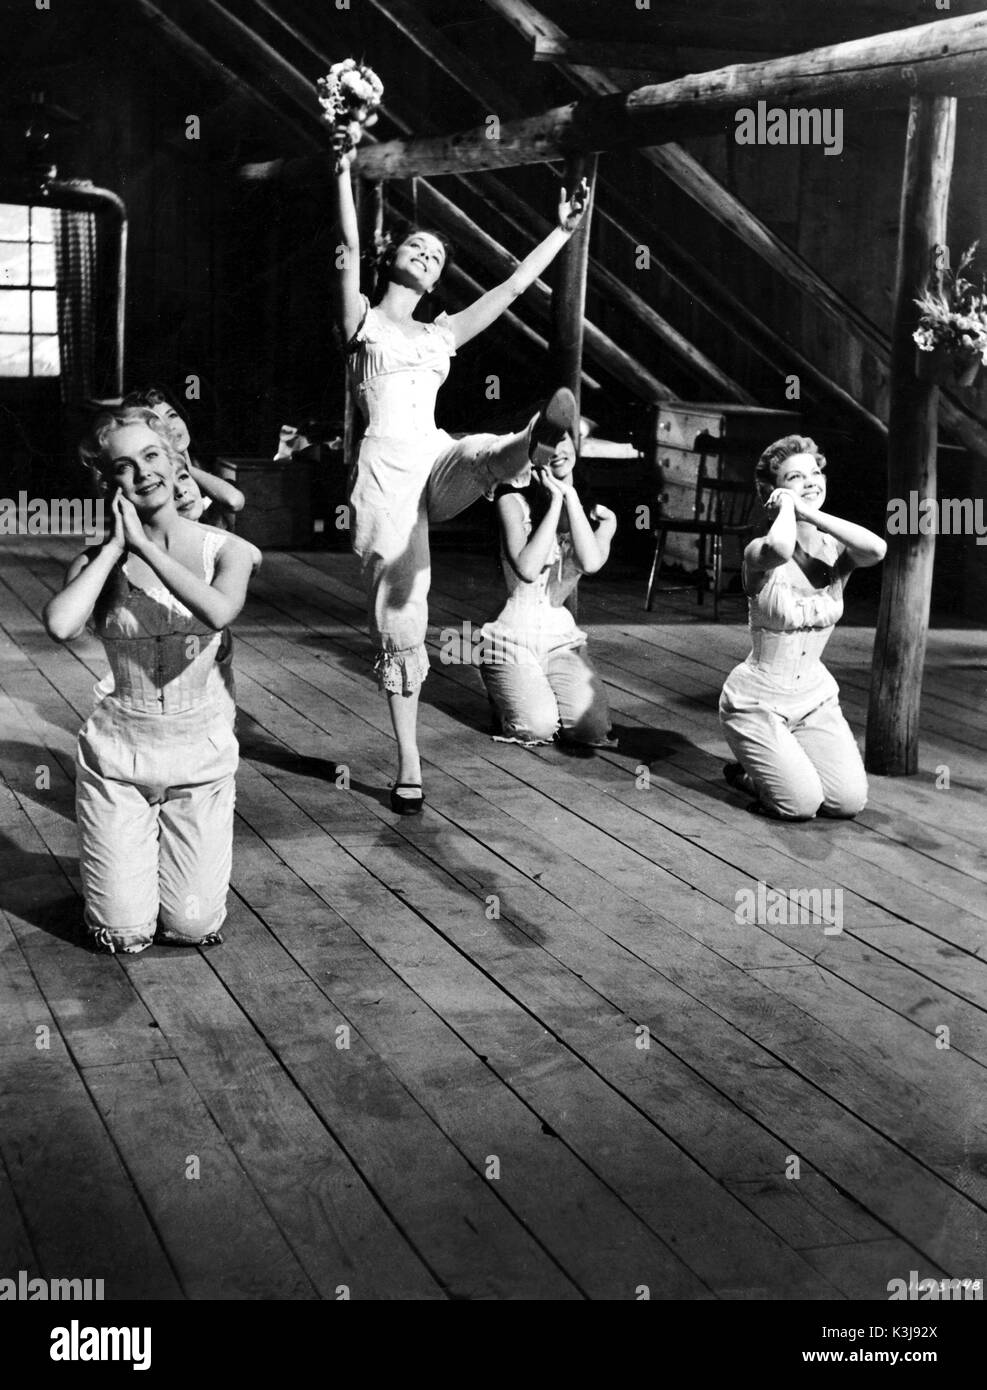 SEVEN BRIDES FOR SEVEN BROTHERS  NANCY KILGAS, BETTY CARR [partially concealed middle], RUTA LEE [partially concealed top], VIRGINIA GIBSON [standing], JULIE NEWMAR [behind foot], NORMA DOGGETT Stock Photo